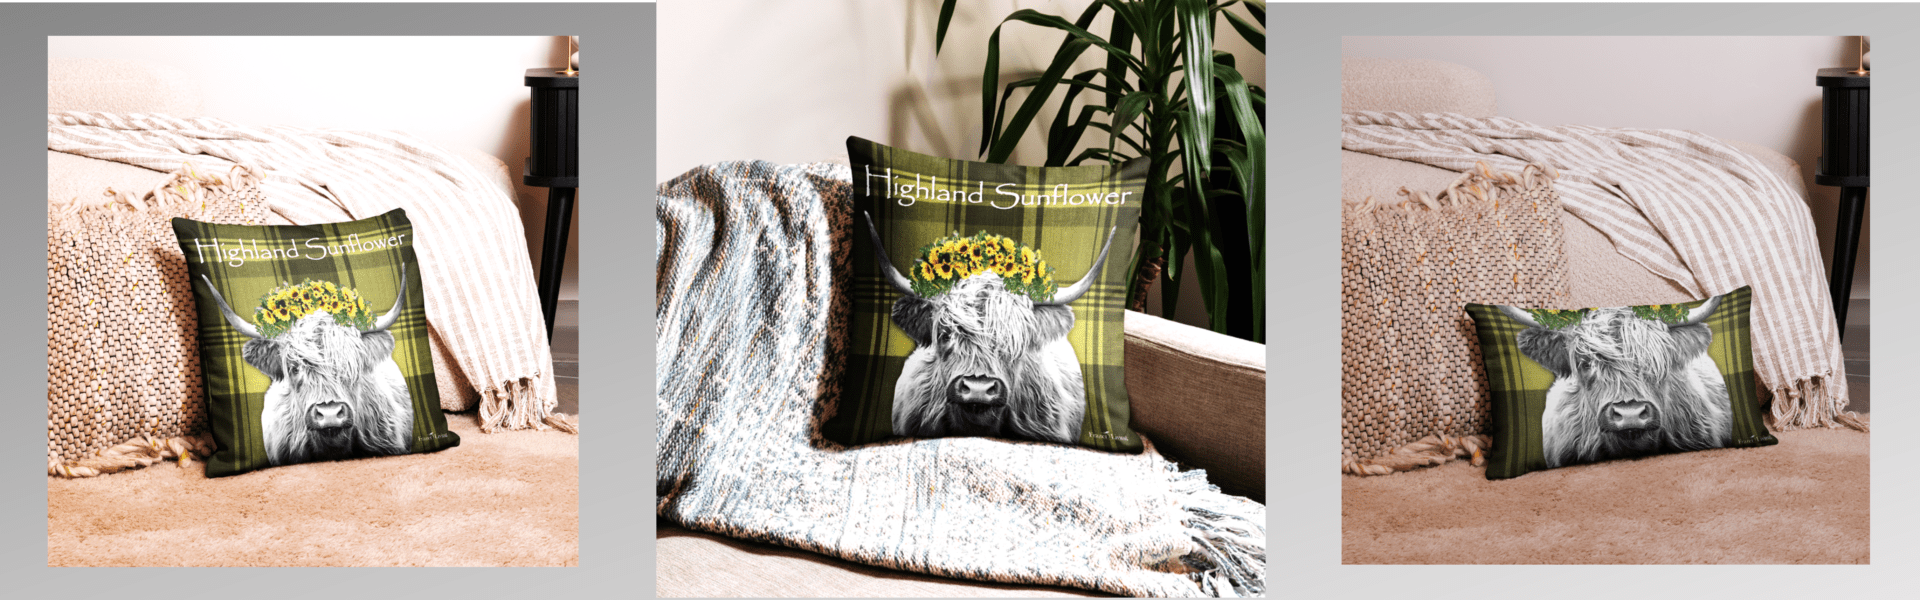 Highland cow with sunflower pillow on sofa.